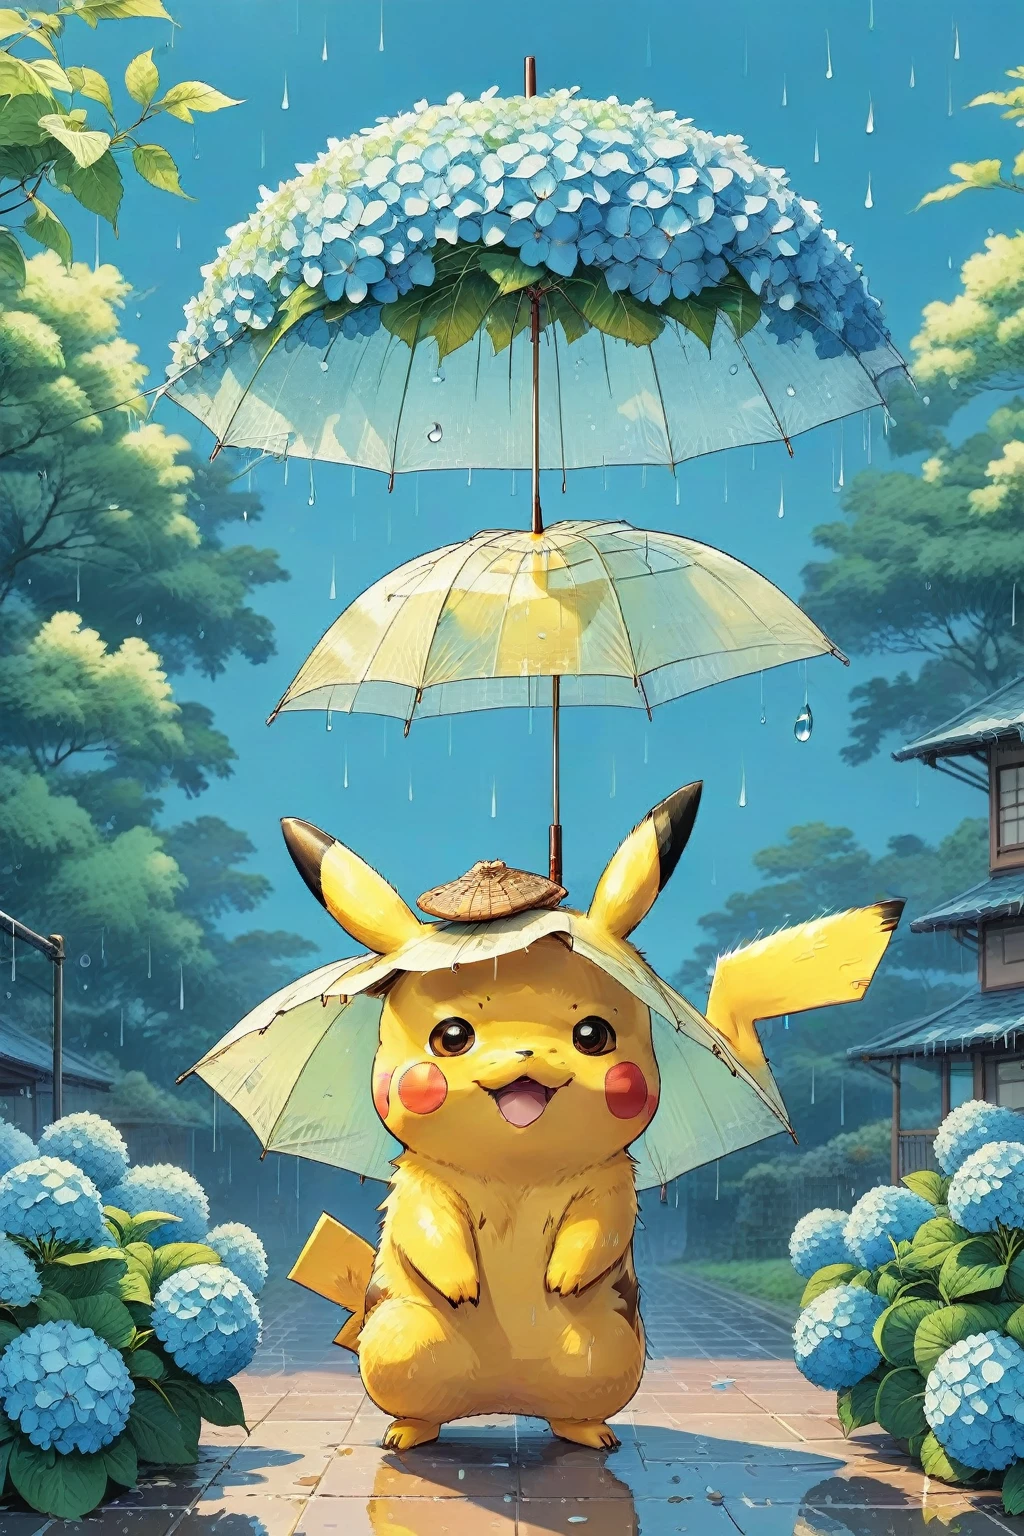 ((anime:1.4,illustration)),(masterpiece, top quality, best quality),(ultra-detailed, absolutely resolution),((16k, high res)),

(((A sphere made of hydrangeas, Pikachu standing on it,
Pikachu holding an umbrella, rain, light blue background))

((cozy lofi illustration:1.4)), ((anime:1.4, illustration)),(masterpiece, top quality, best quality),(ultra-detailed, absolutely resolution),((16k, high res)) BREAK {lofi art, style of Laurie Greasley, style of Makoto Shinkai, anime aesthetic}, BREAK { (produces images with information than 40 million pixels with cinematic-like detailed textures shot on a Sony SLR).}